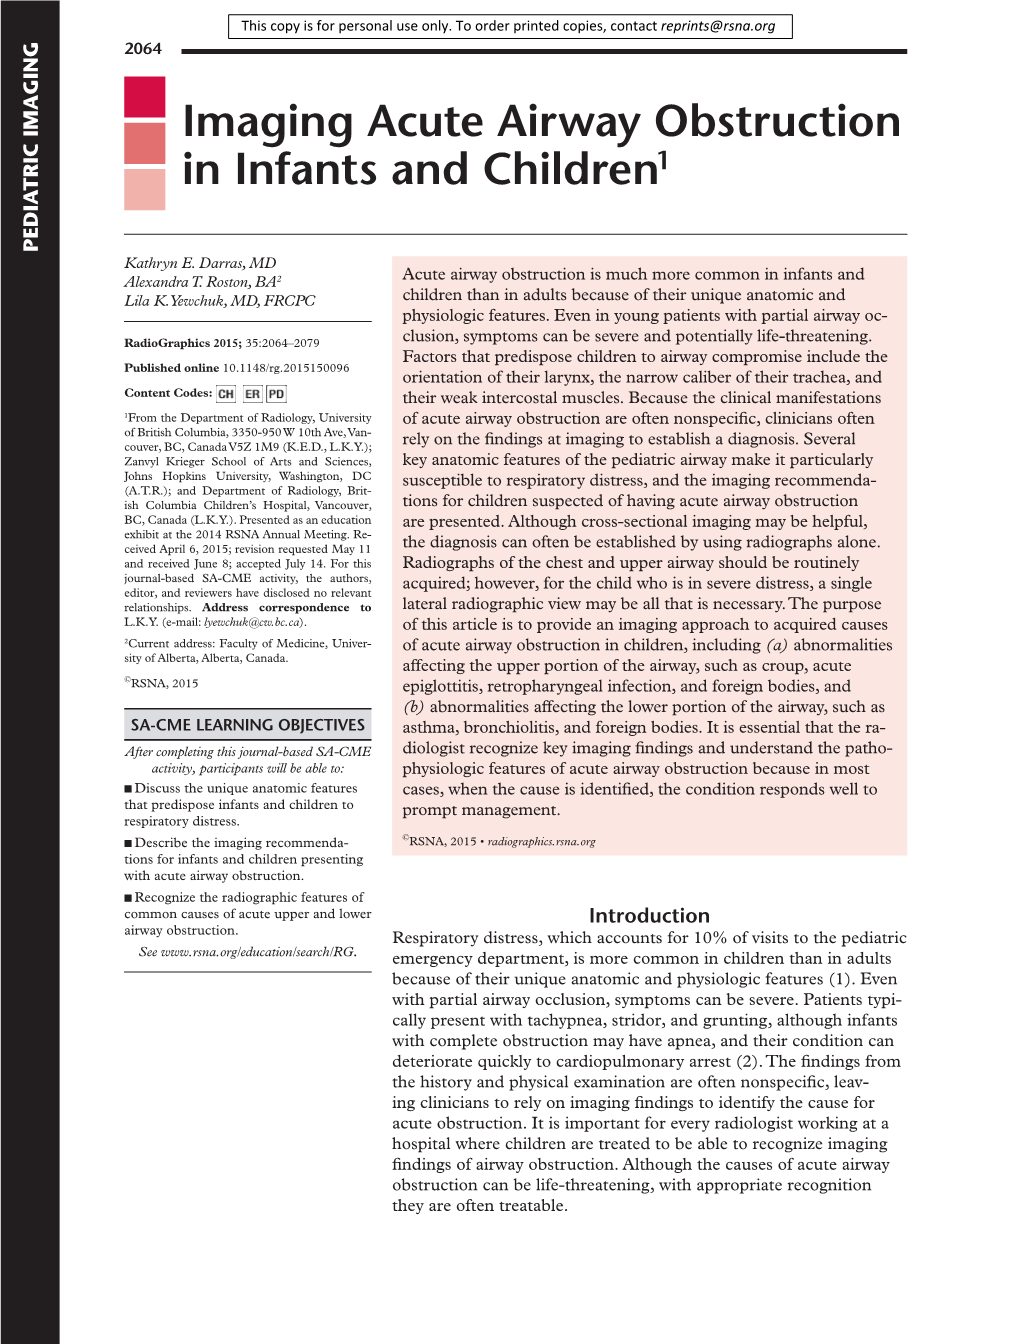 Imaging Acute Airway Obstruction in Infants and Children1